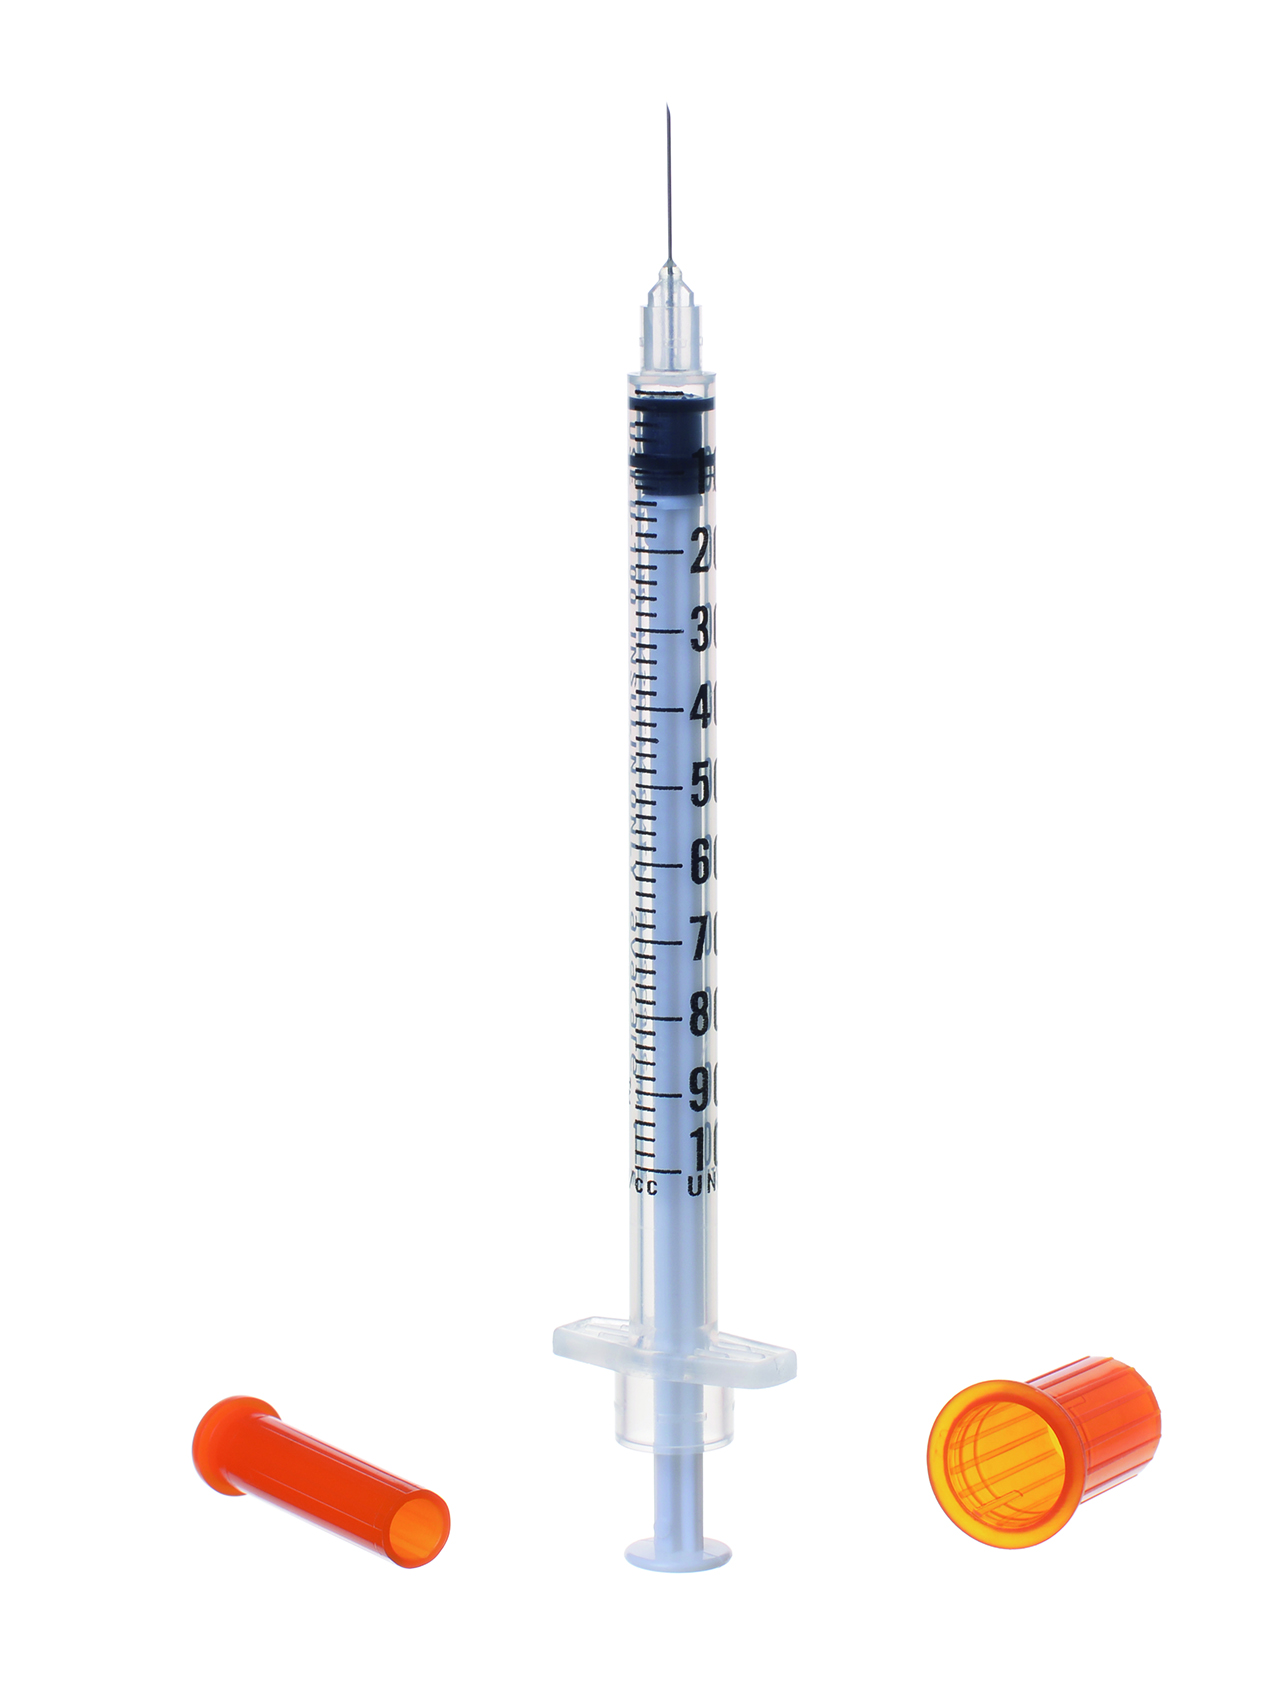 Medical Disposable Insulin Syringe 1ml With 29g 30g Needle From China Manufacturer Forlong Medical